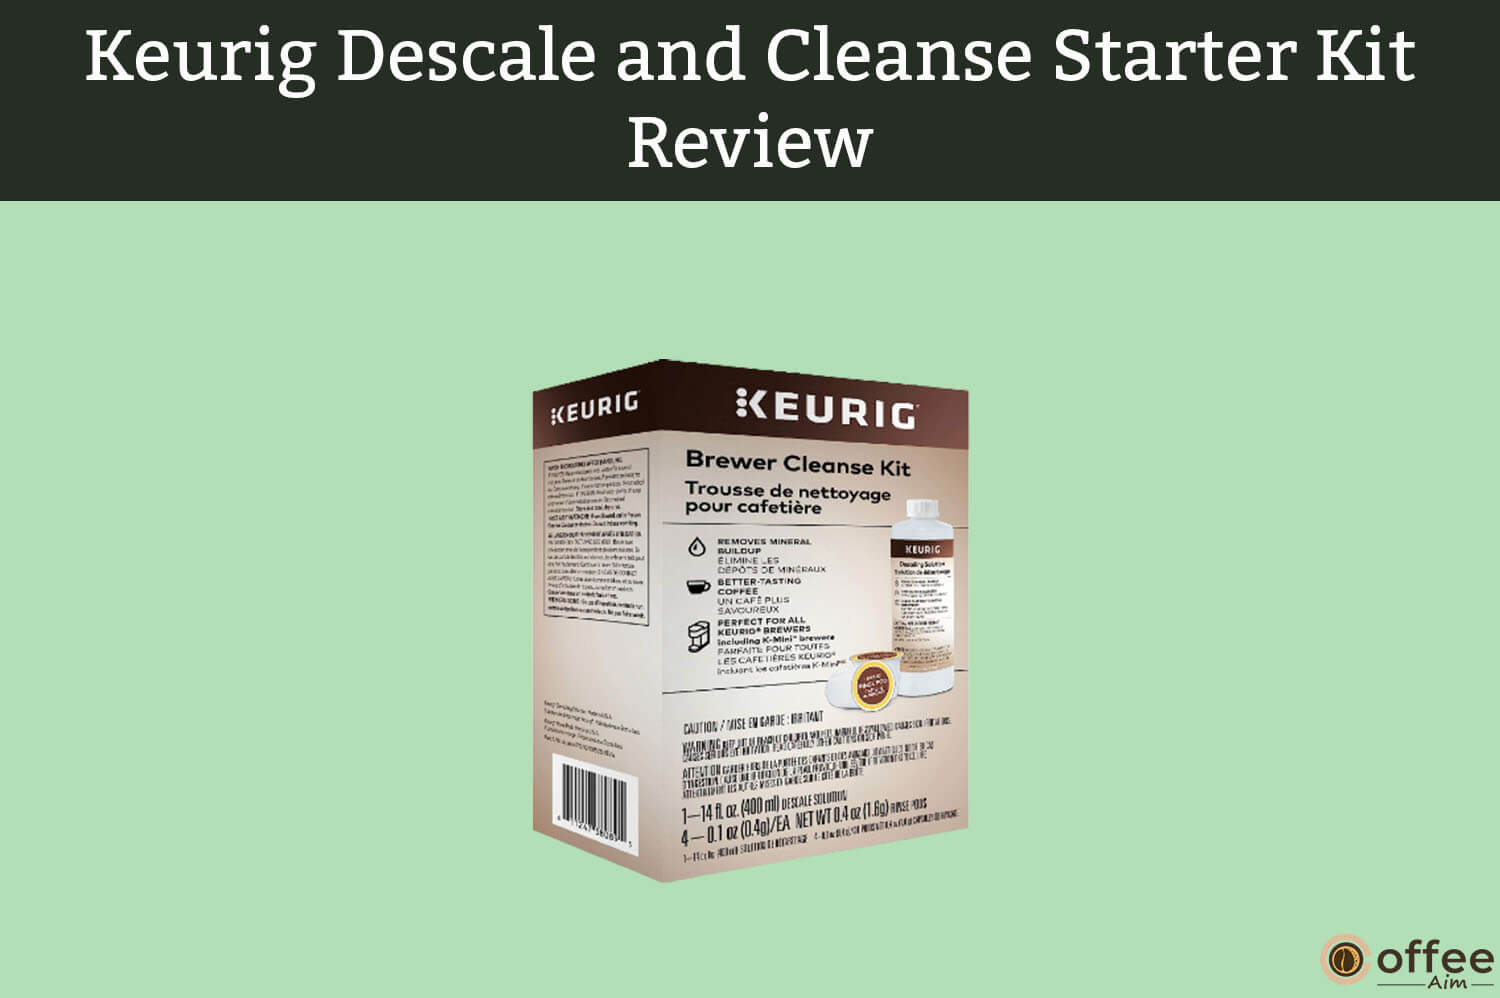 Featured image for the article "Keurig Descale and Cleanse Starter Kit Review"